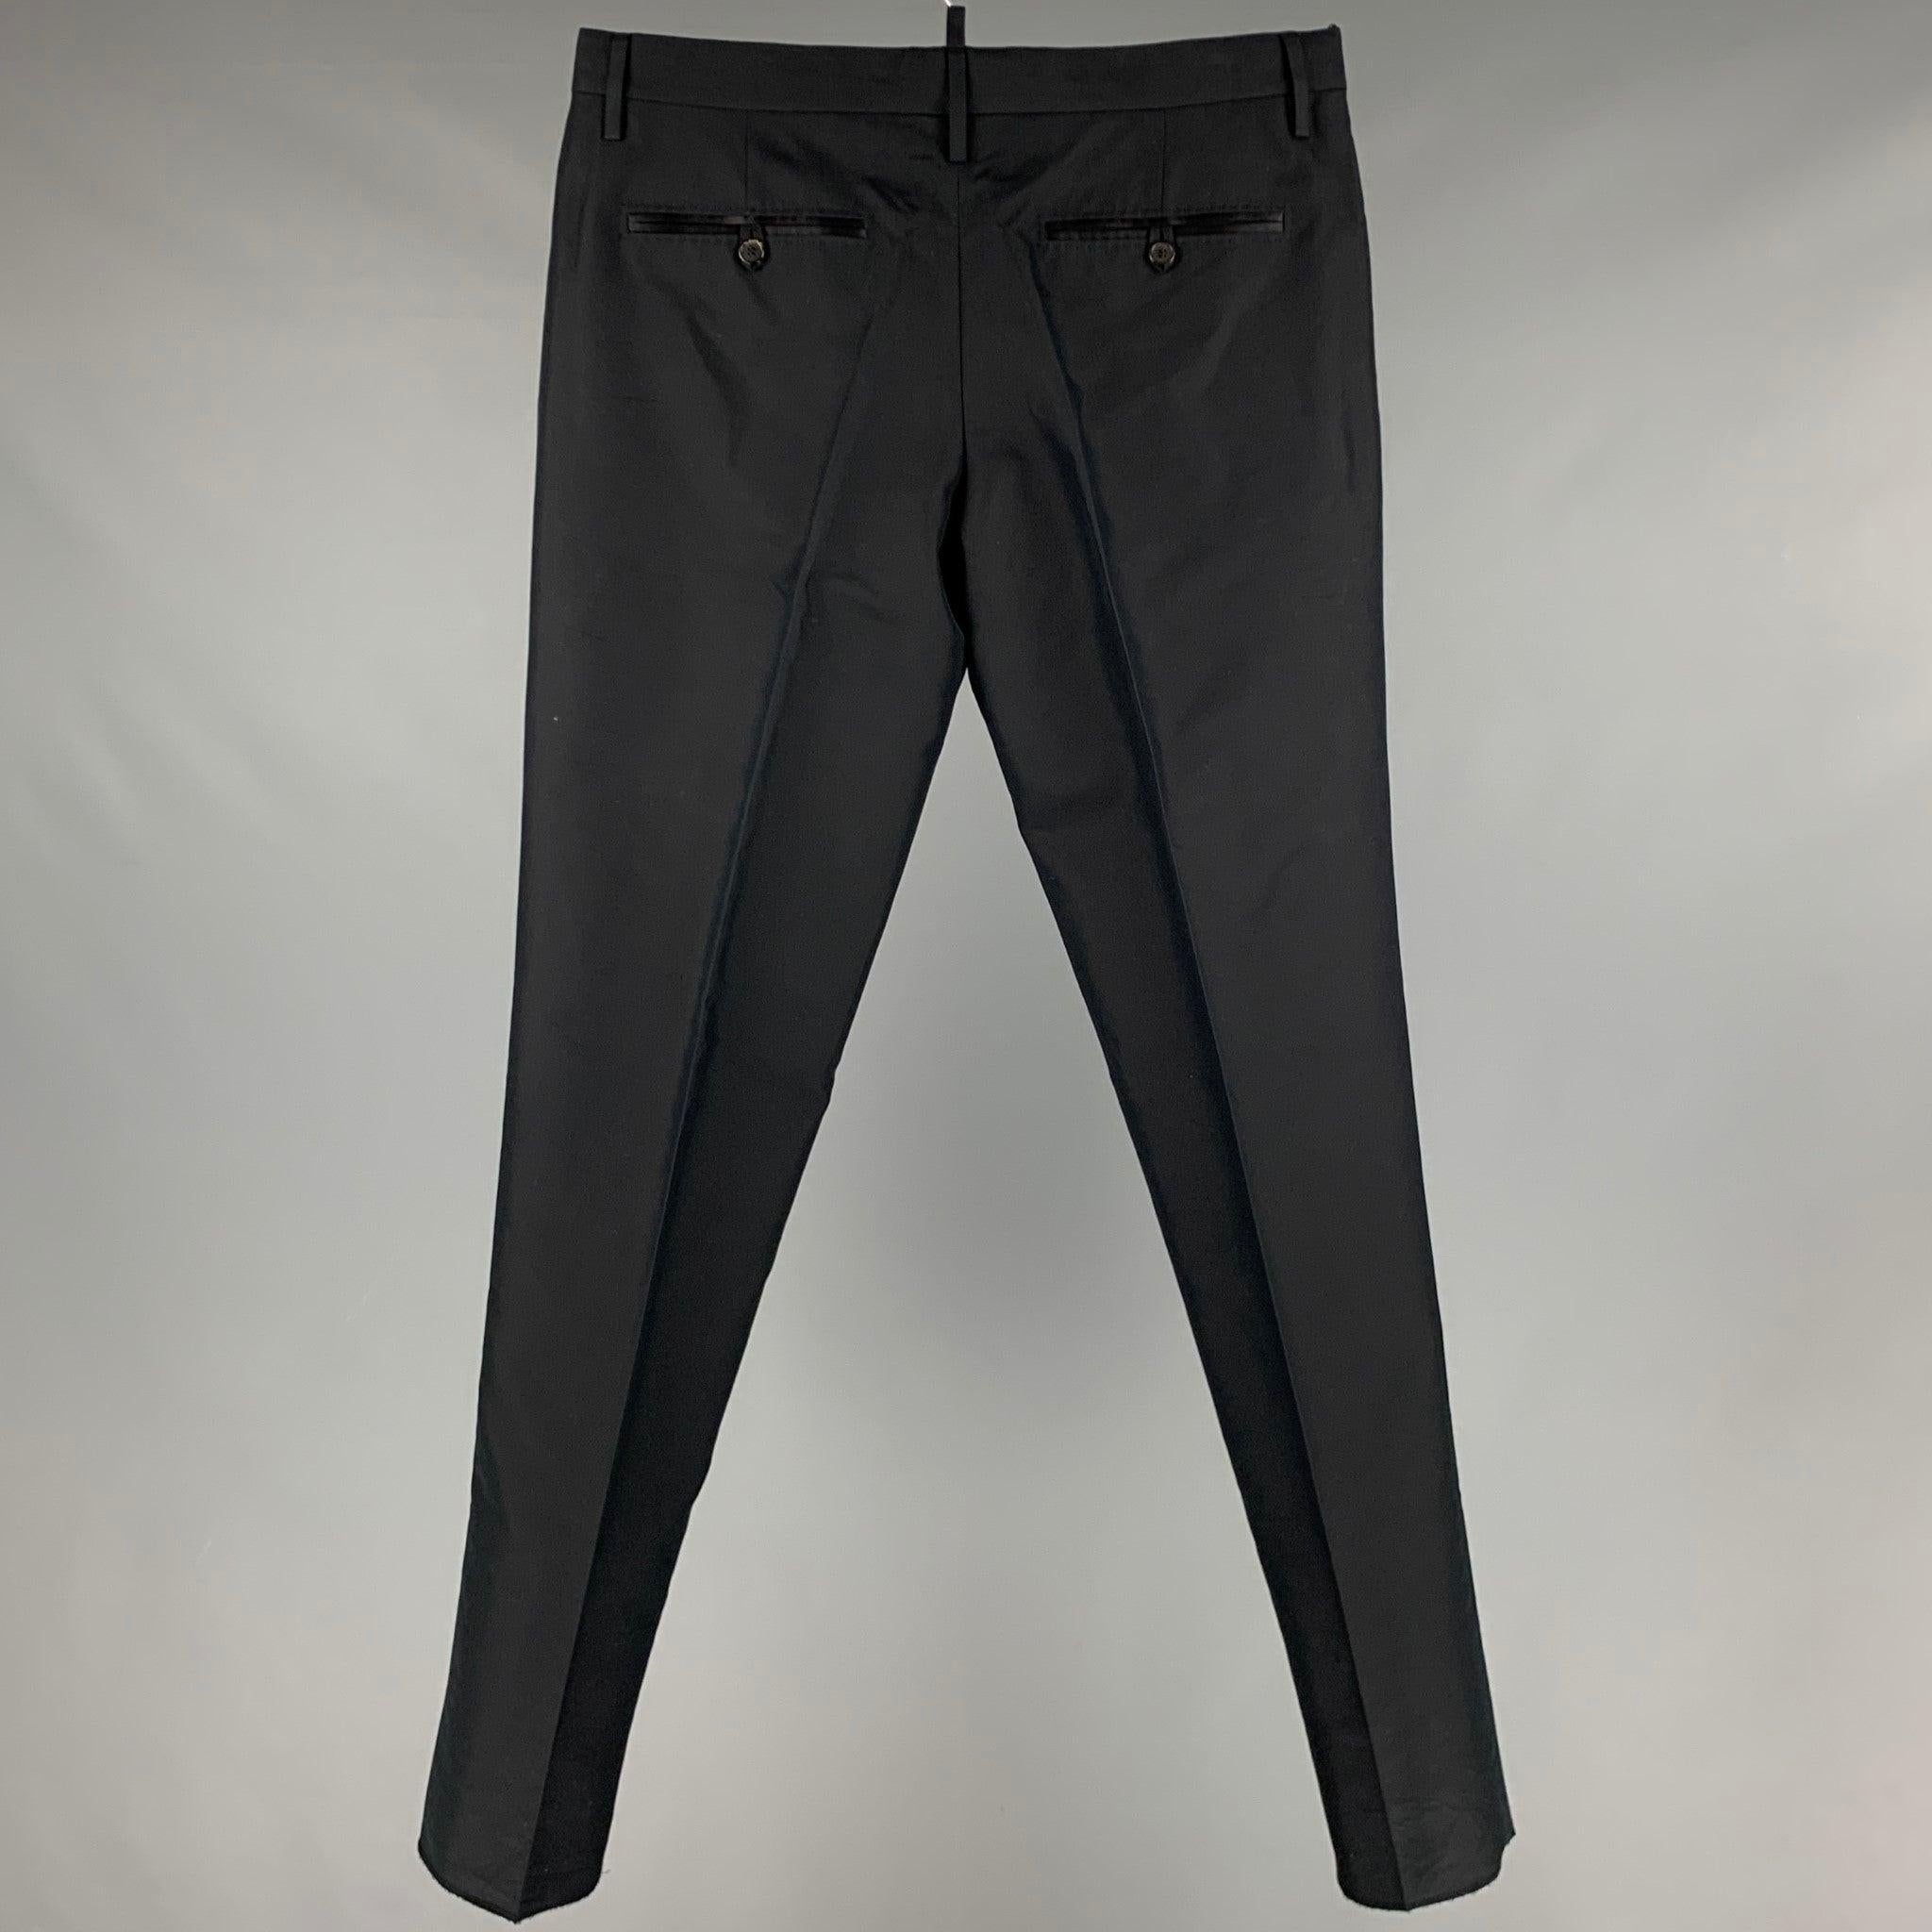 DSQUARED2 dress pants
in a black cotton silk blend fabric featuring tuxedo stripes and button fly closure. Made in Italy.New With Tags. Minor mark on left backside. 

Marked:   48 

Measurements: 
  Waist: 32 inches Rise: 8 inches Inseam: 34 inches